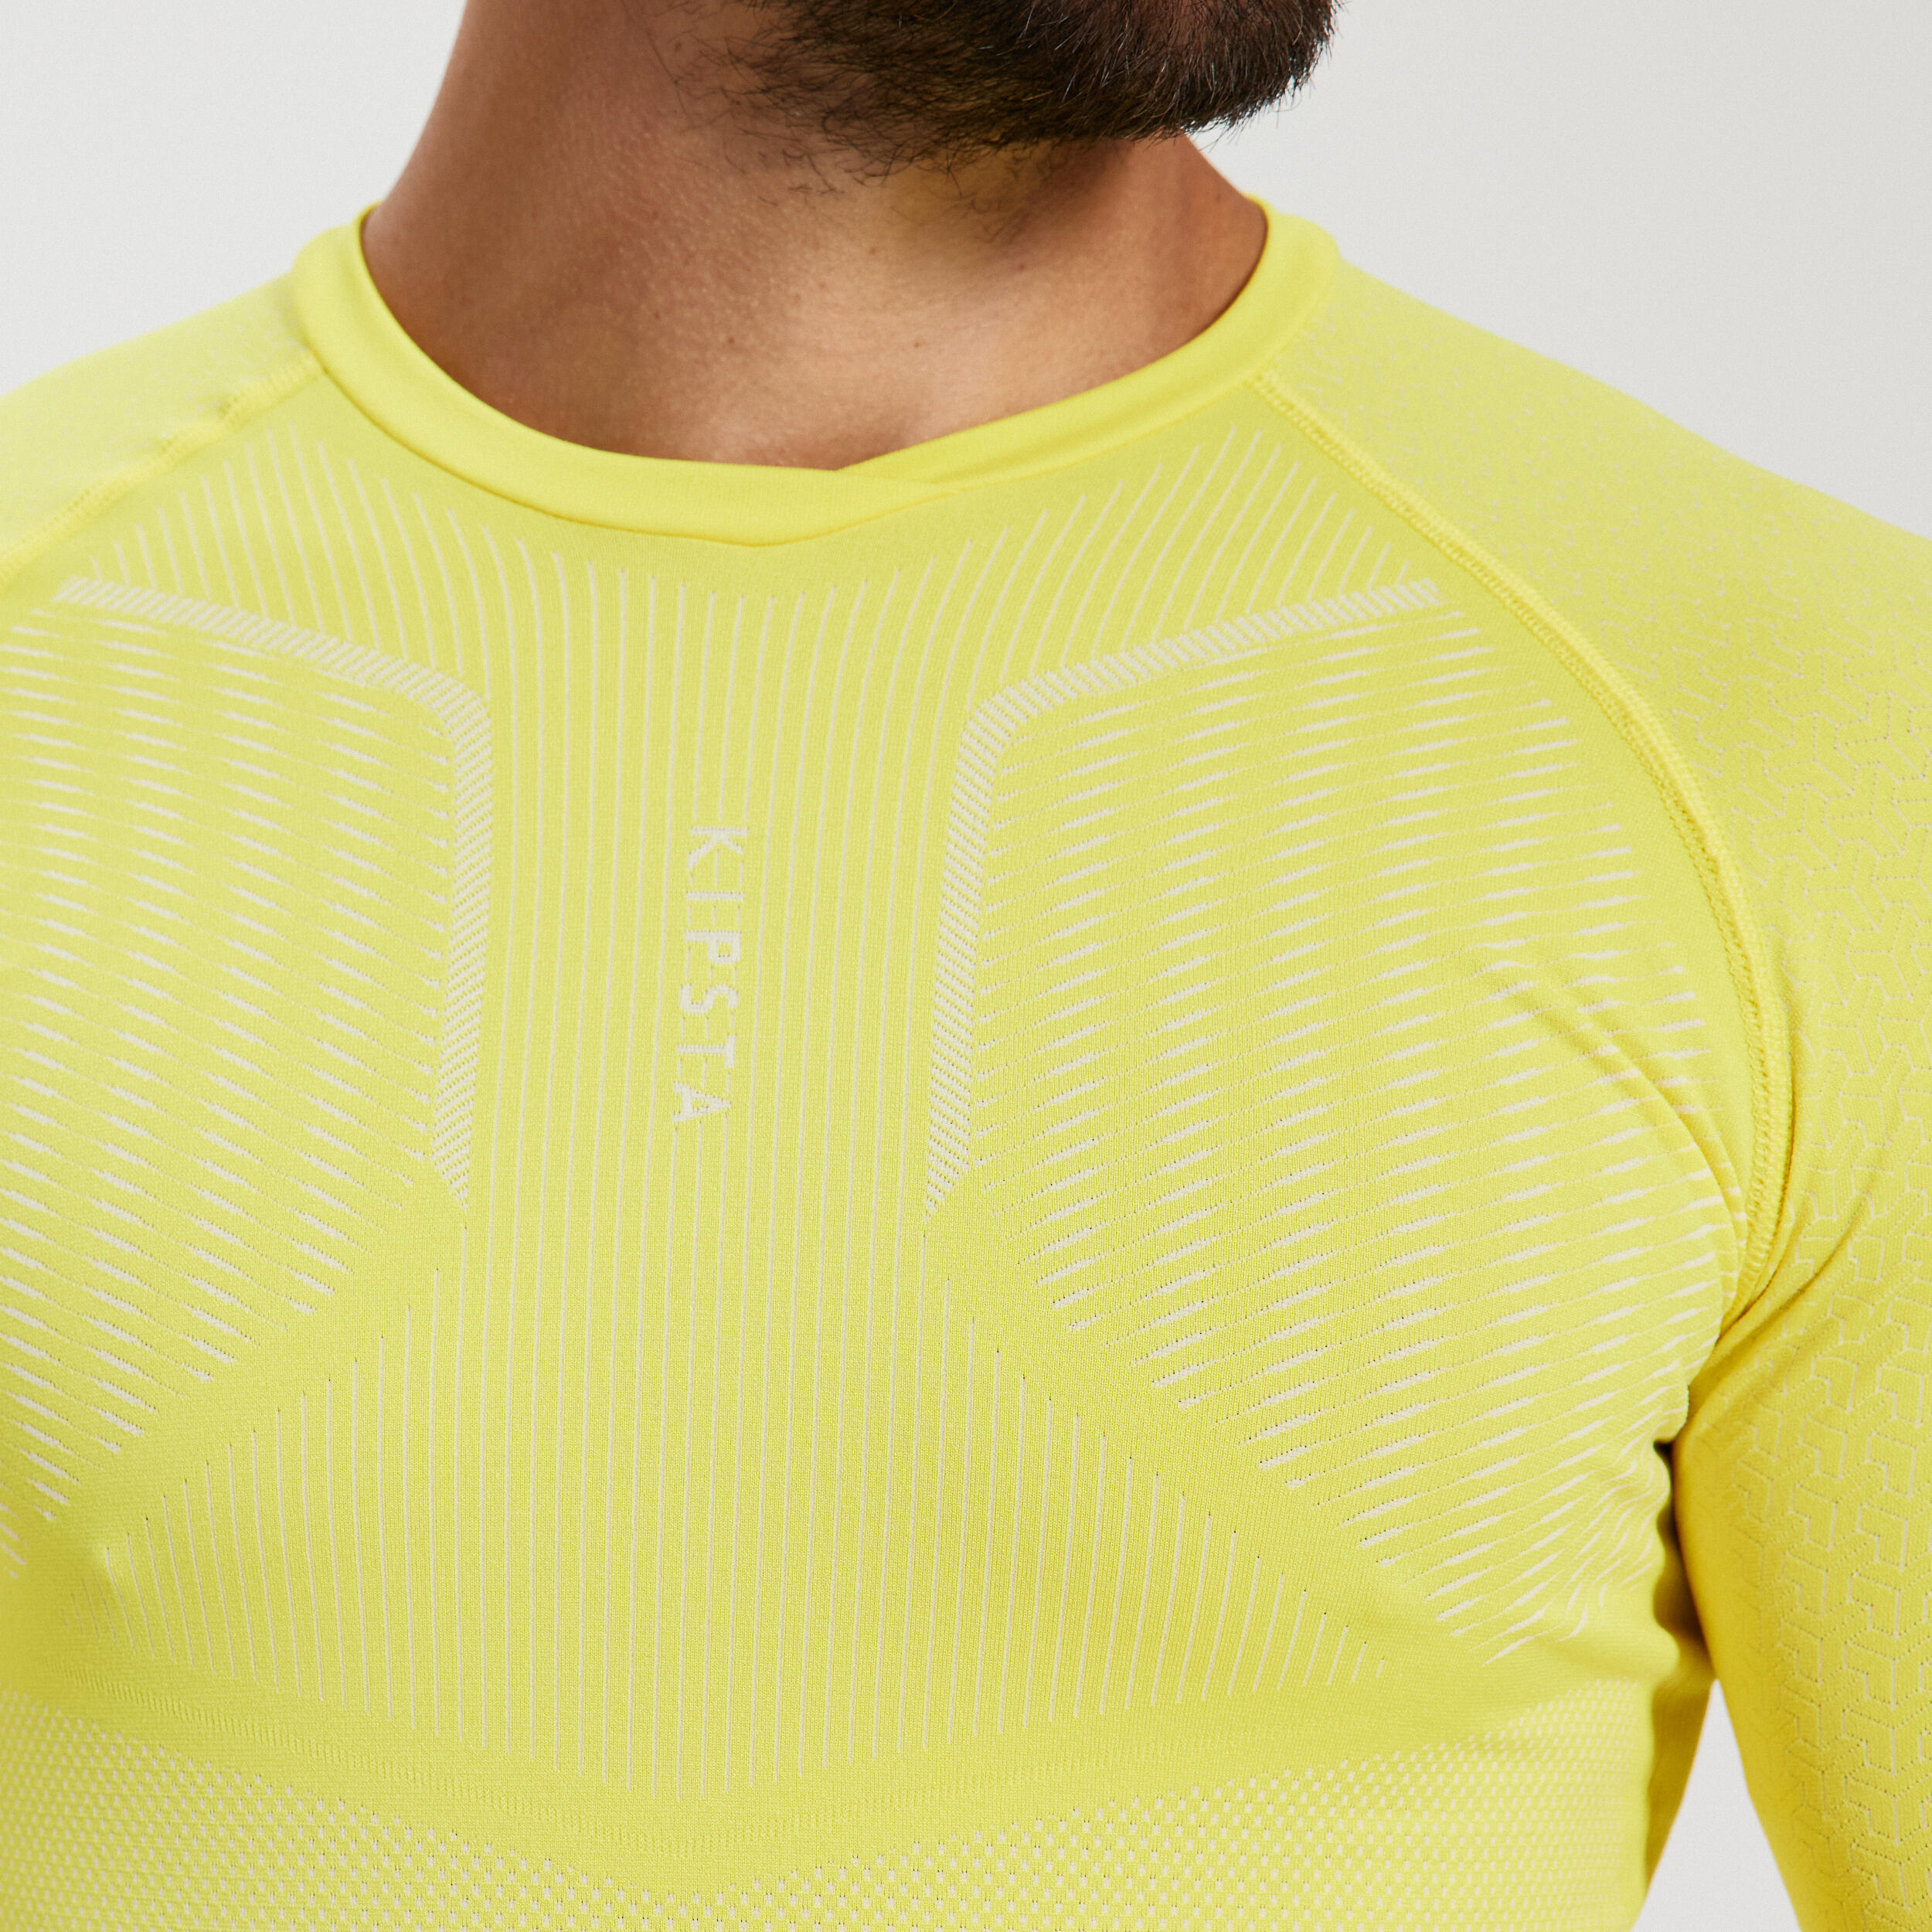 Adult Long-Sleeved Thermal Base Layer Top Keepdry 500 - Yellow 7/15